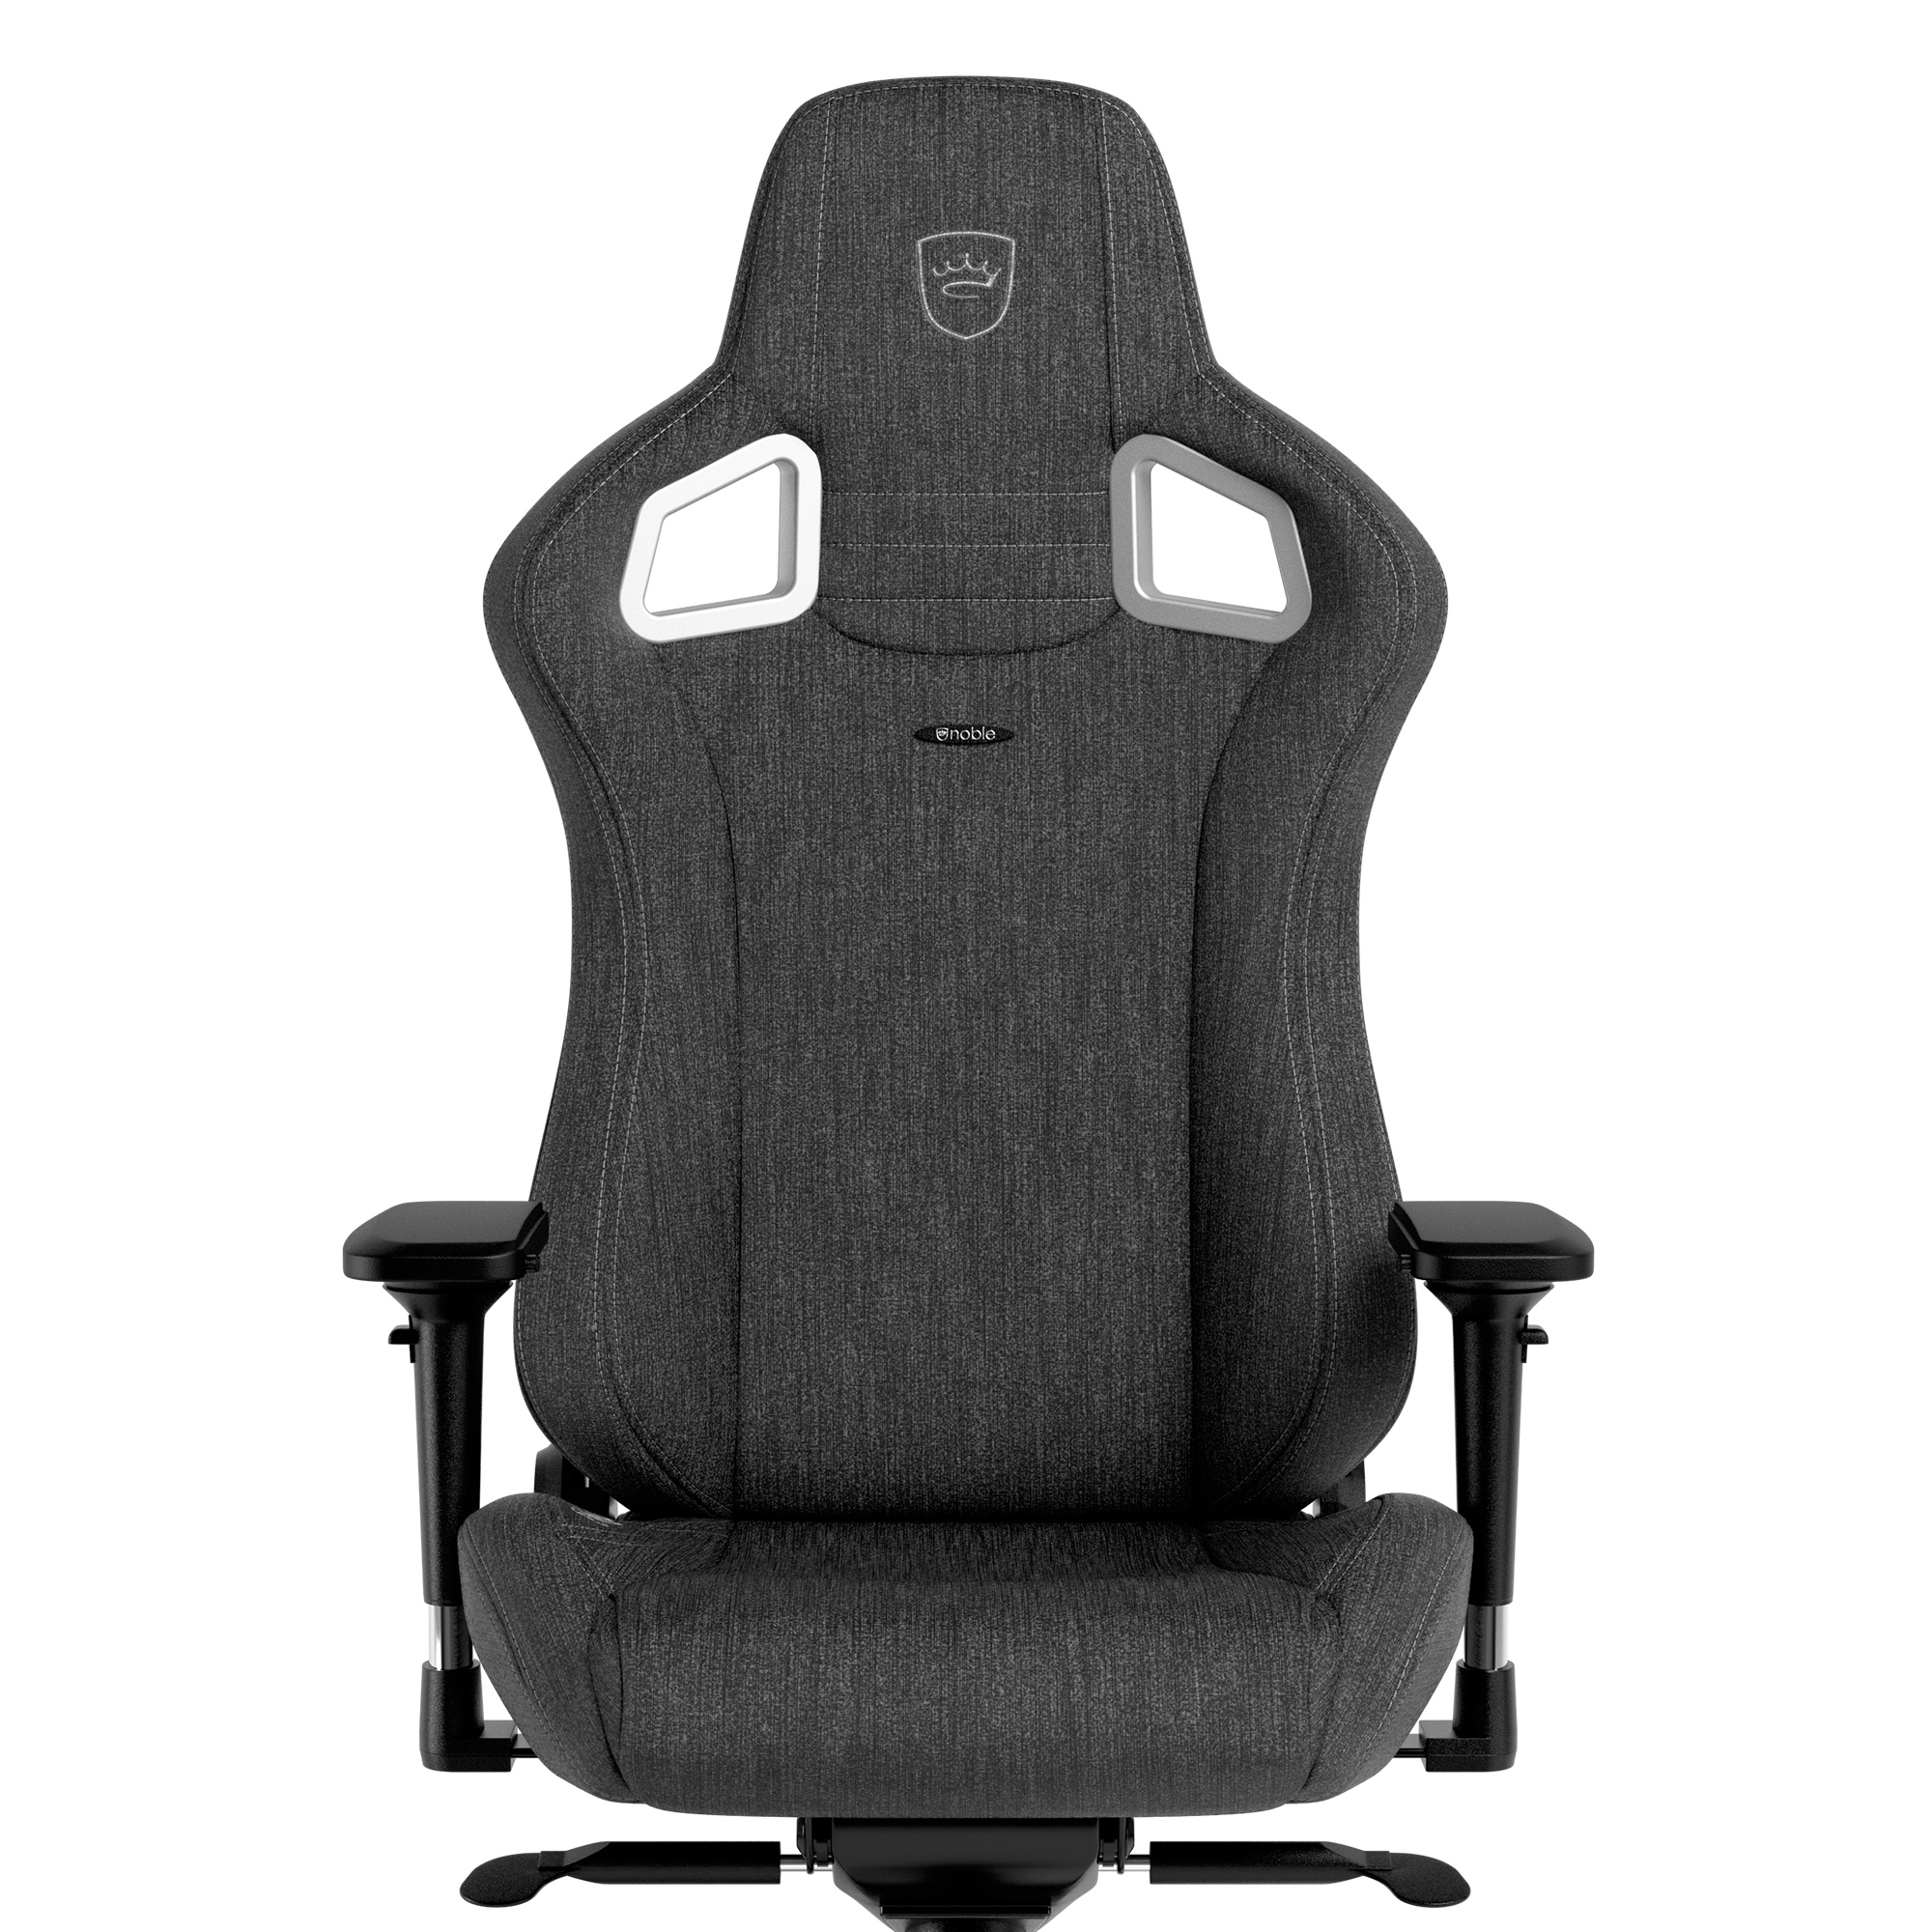 noblechairs - noblechairs EPIC TX Gaming Chair - Anthracite Fabric Gaming Chair